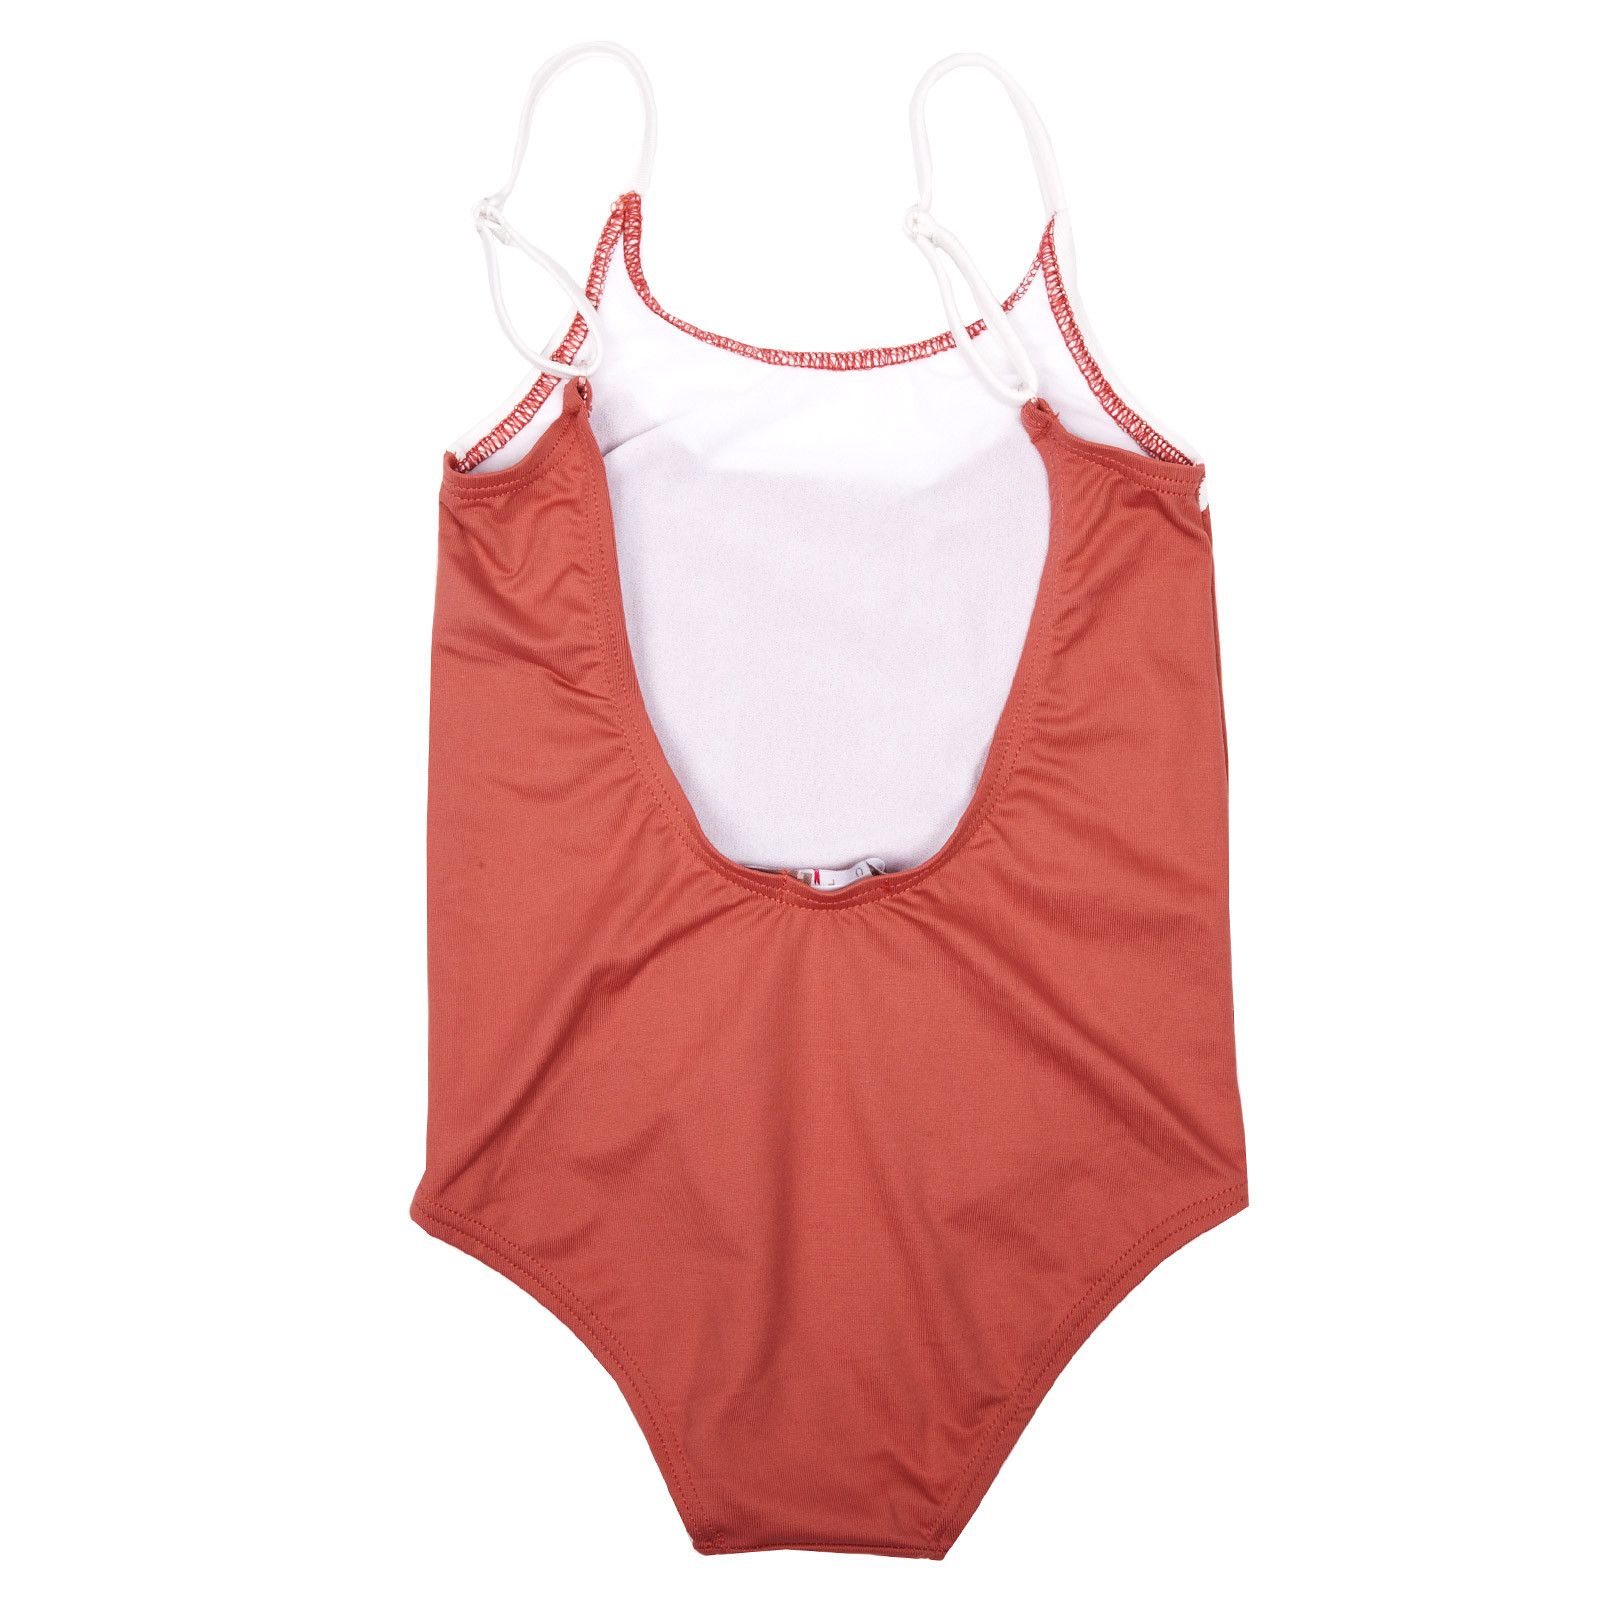 Girls Red Cat Face Printed Swimsuit - CÉMAROSE | Children's Fashion Store - 2